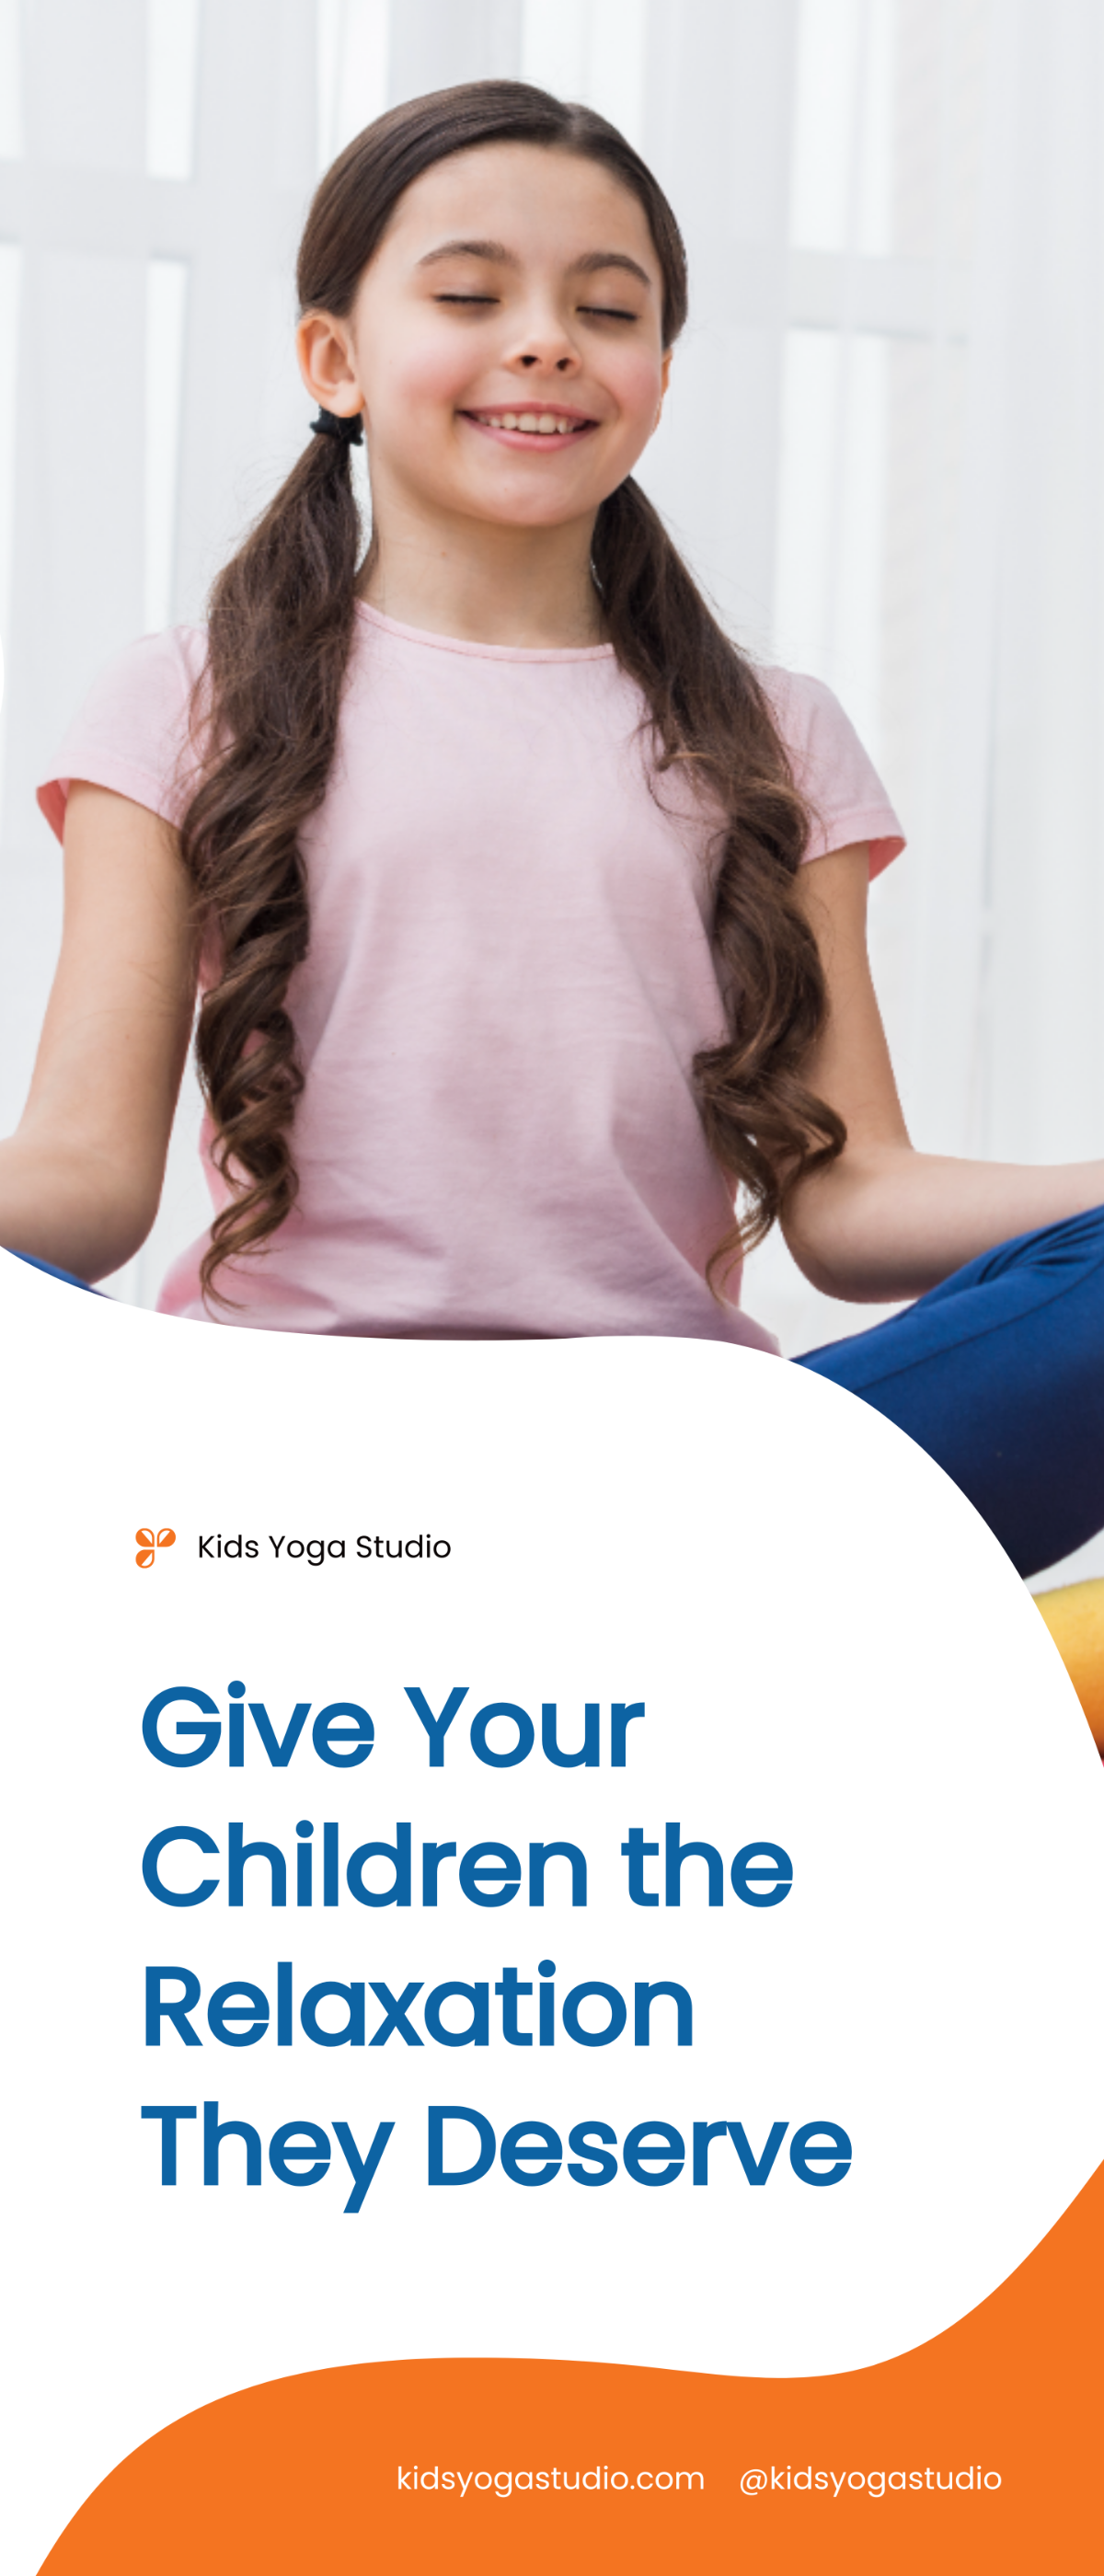 Kids Yoga Roll Up Banner Template